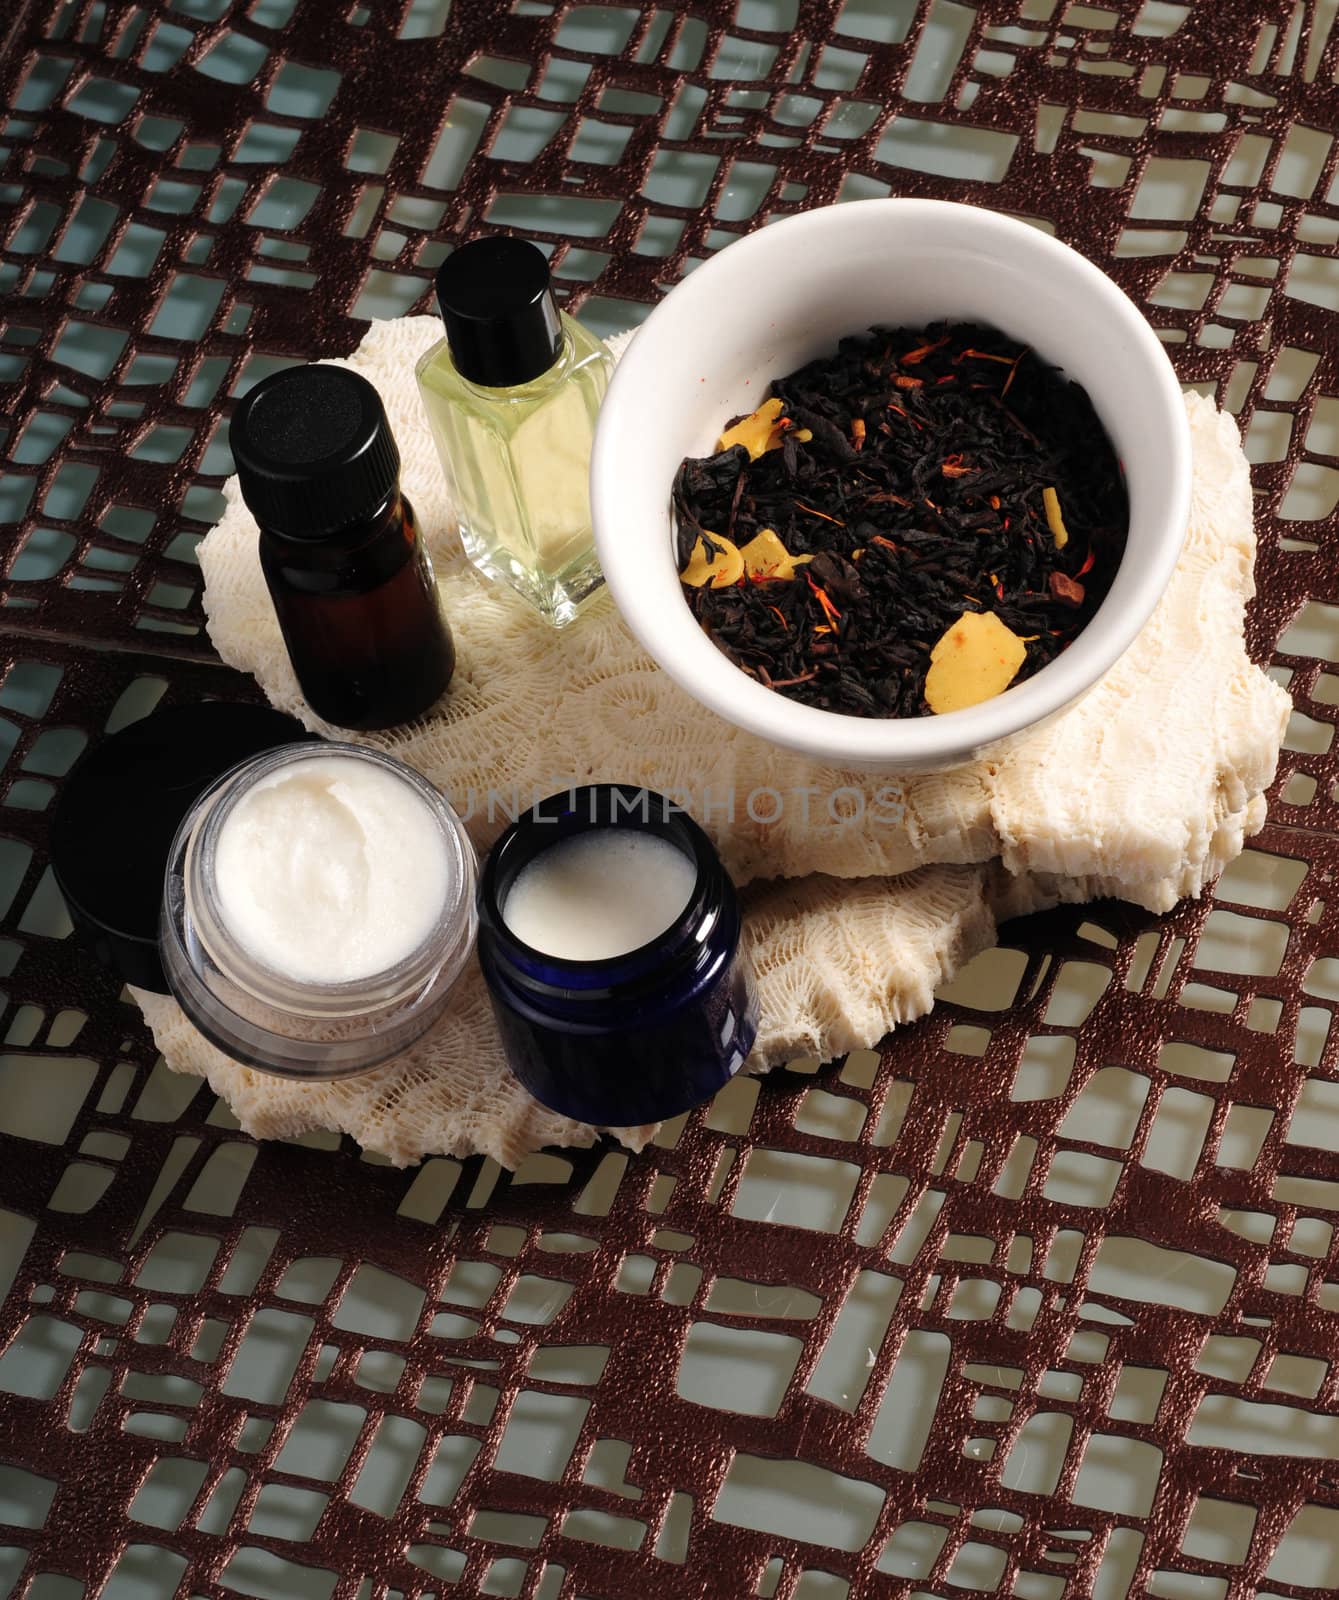 Aromatherapy with potpourri, essential oils and lotions